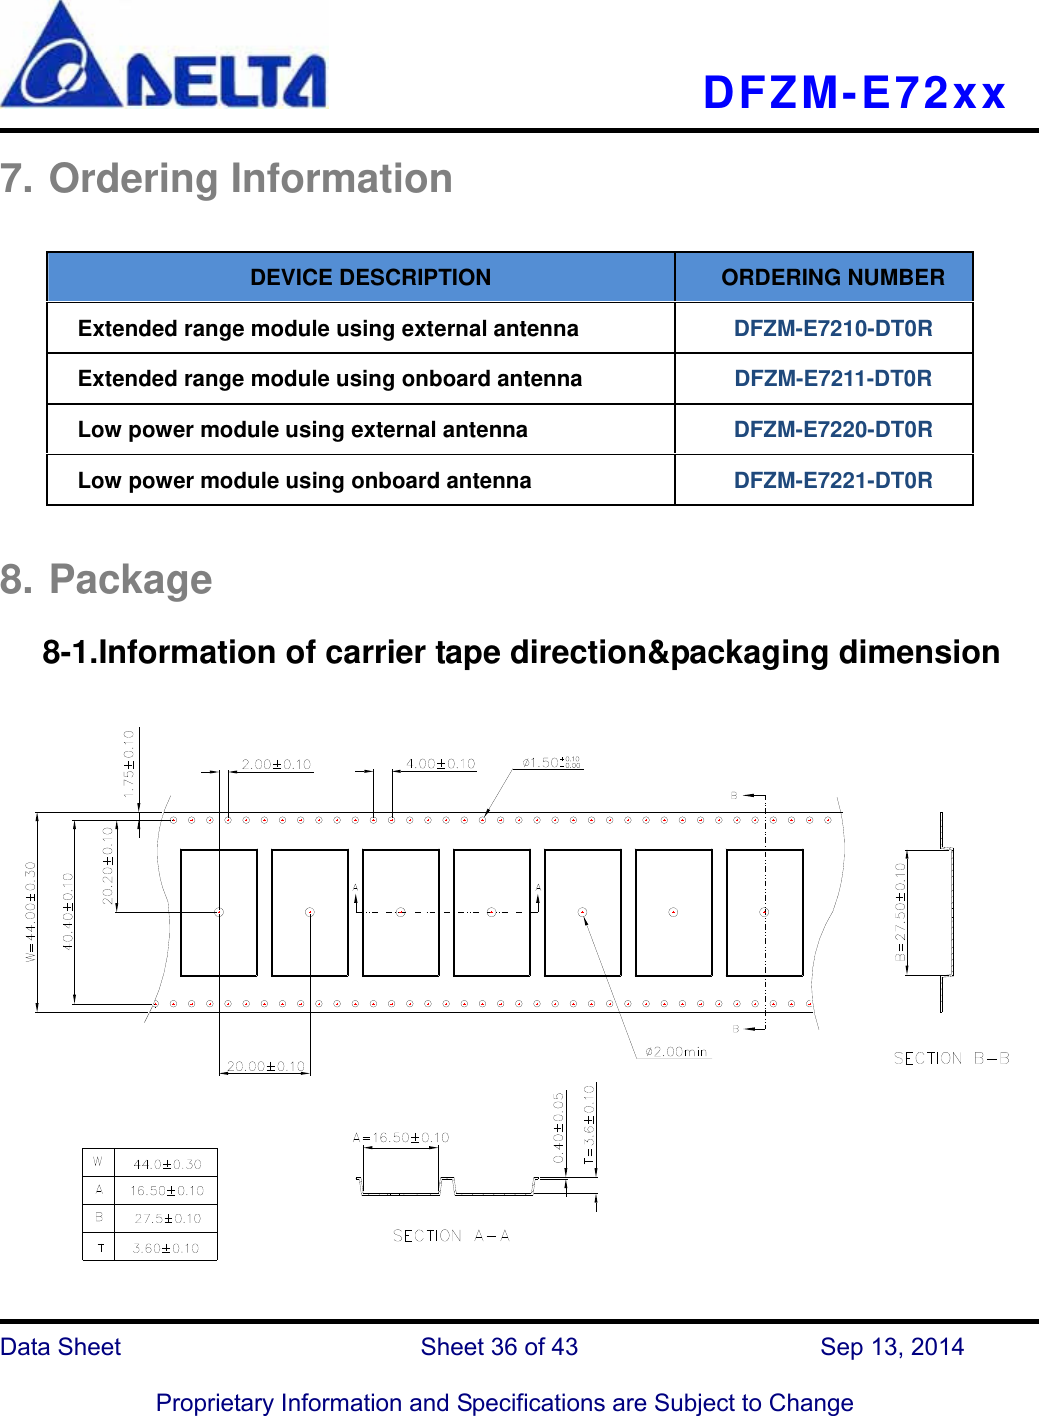   DFZM-E72xx   Data Sheet                 Sheet 36 of 43           Sep 13, 2014  Proprietary Information and Specifications are Subject to Change 7. Ordering Information  DEVICE DESCRIPTION  ORDERING NUMBER Extended range module using external antenna  DFZM-E7210-DT0R Extended range module using onboard antenna  DFZM-E7211-DT0R Low power module using external antenna  DFZM-E7220-DT0R Low power module using onboard antenna  DFZM-E7221-DT0R  8. Package    8-1.Information of carrier tape direction&amp;packaging dimension              